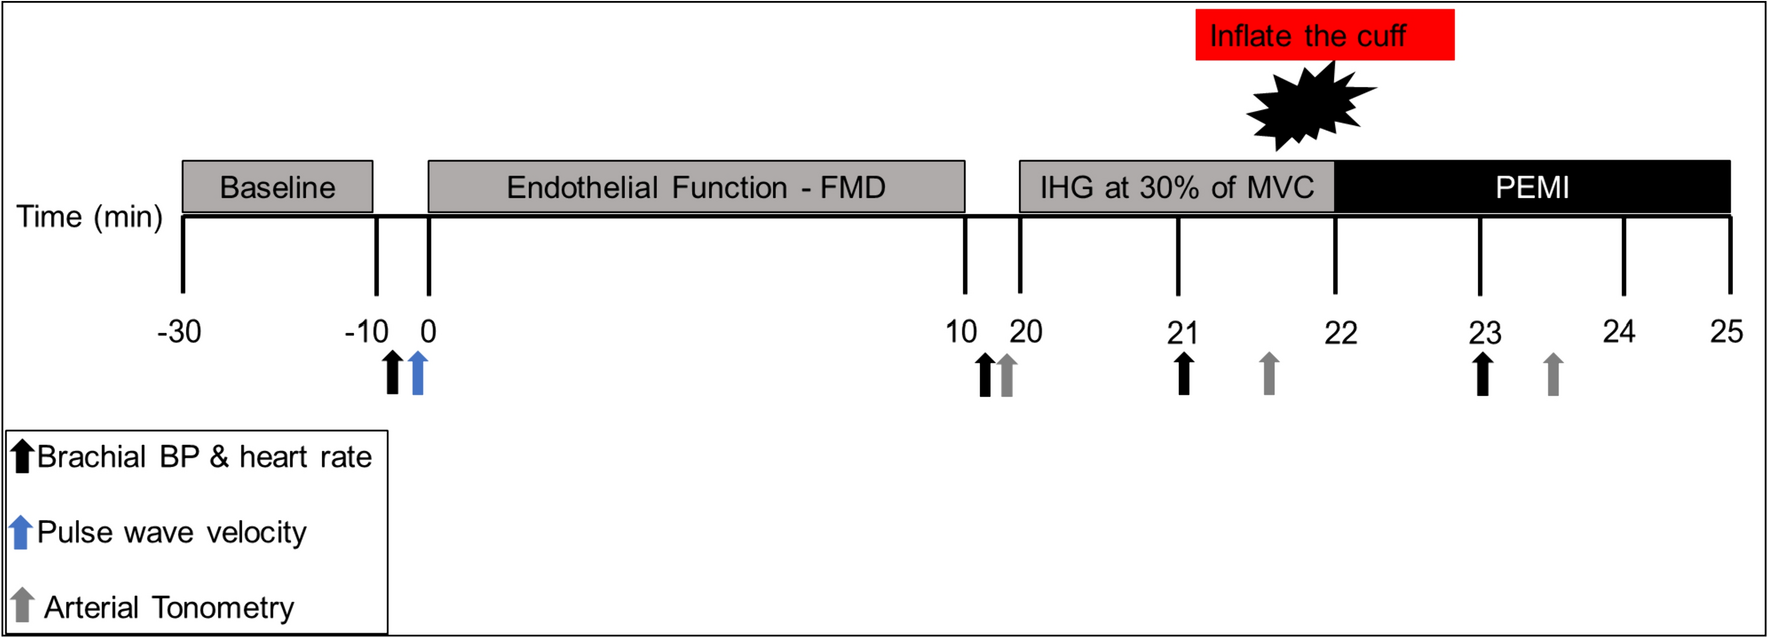 Endothelial dysfunction influences augmented aortic hemodynamic responses to metaboreflex activation in postmenopausal women